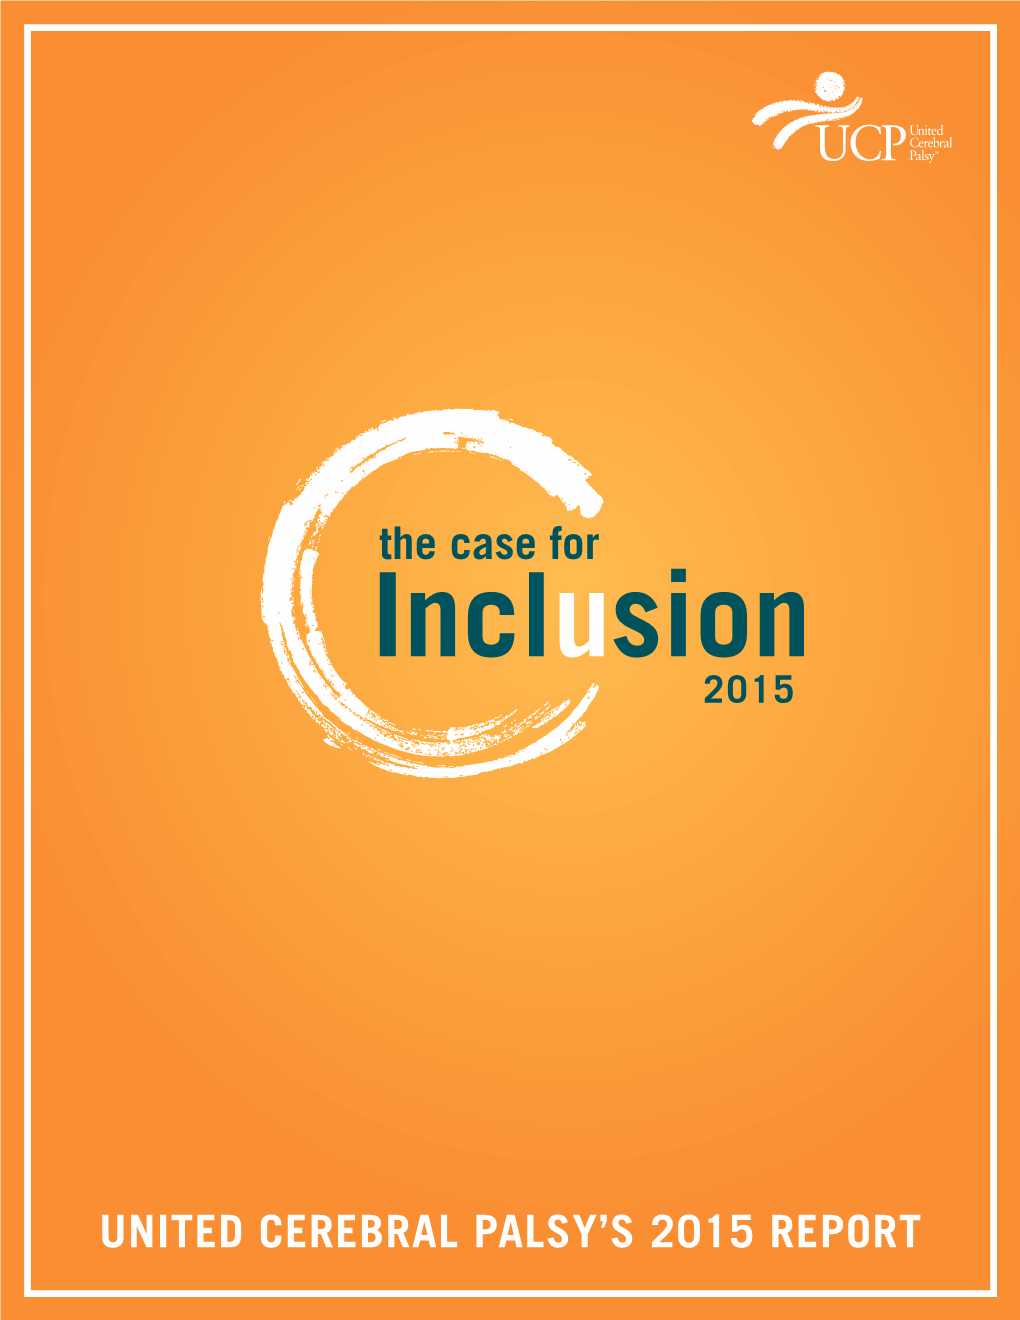 The Case for Inclusion – UCP's 2015 Report